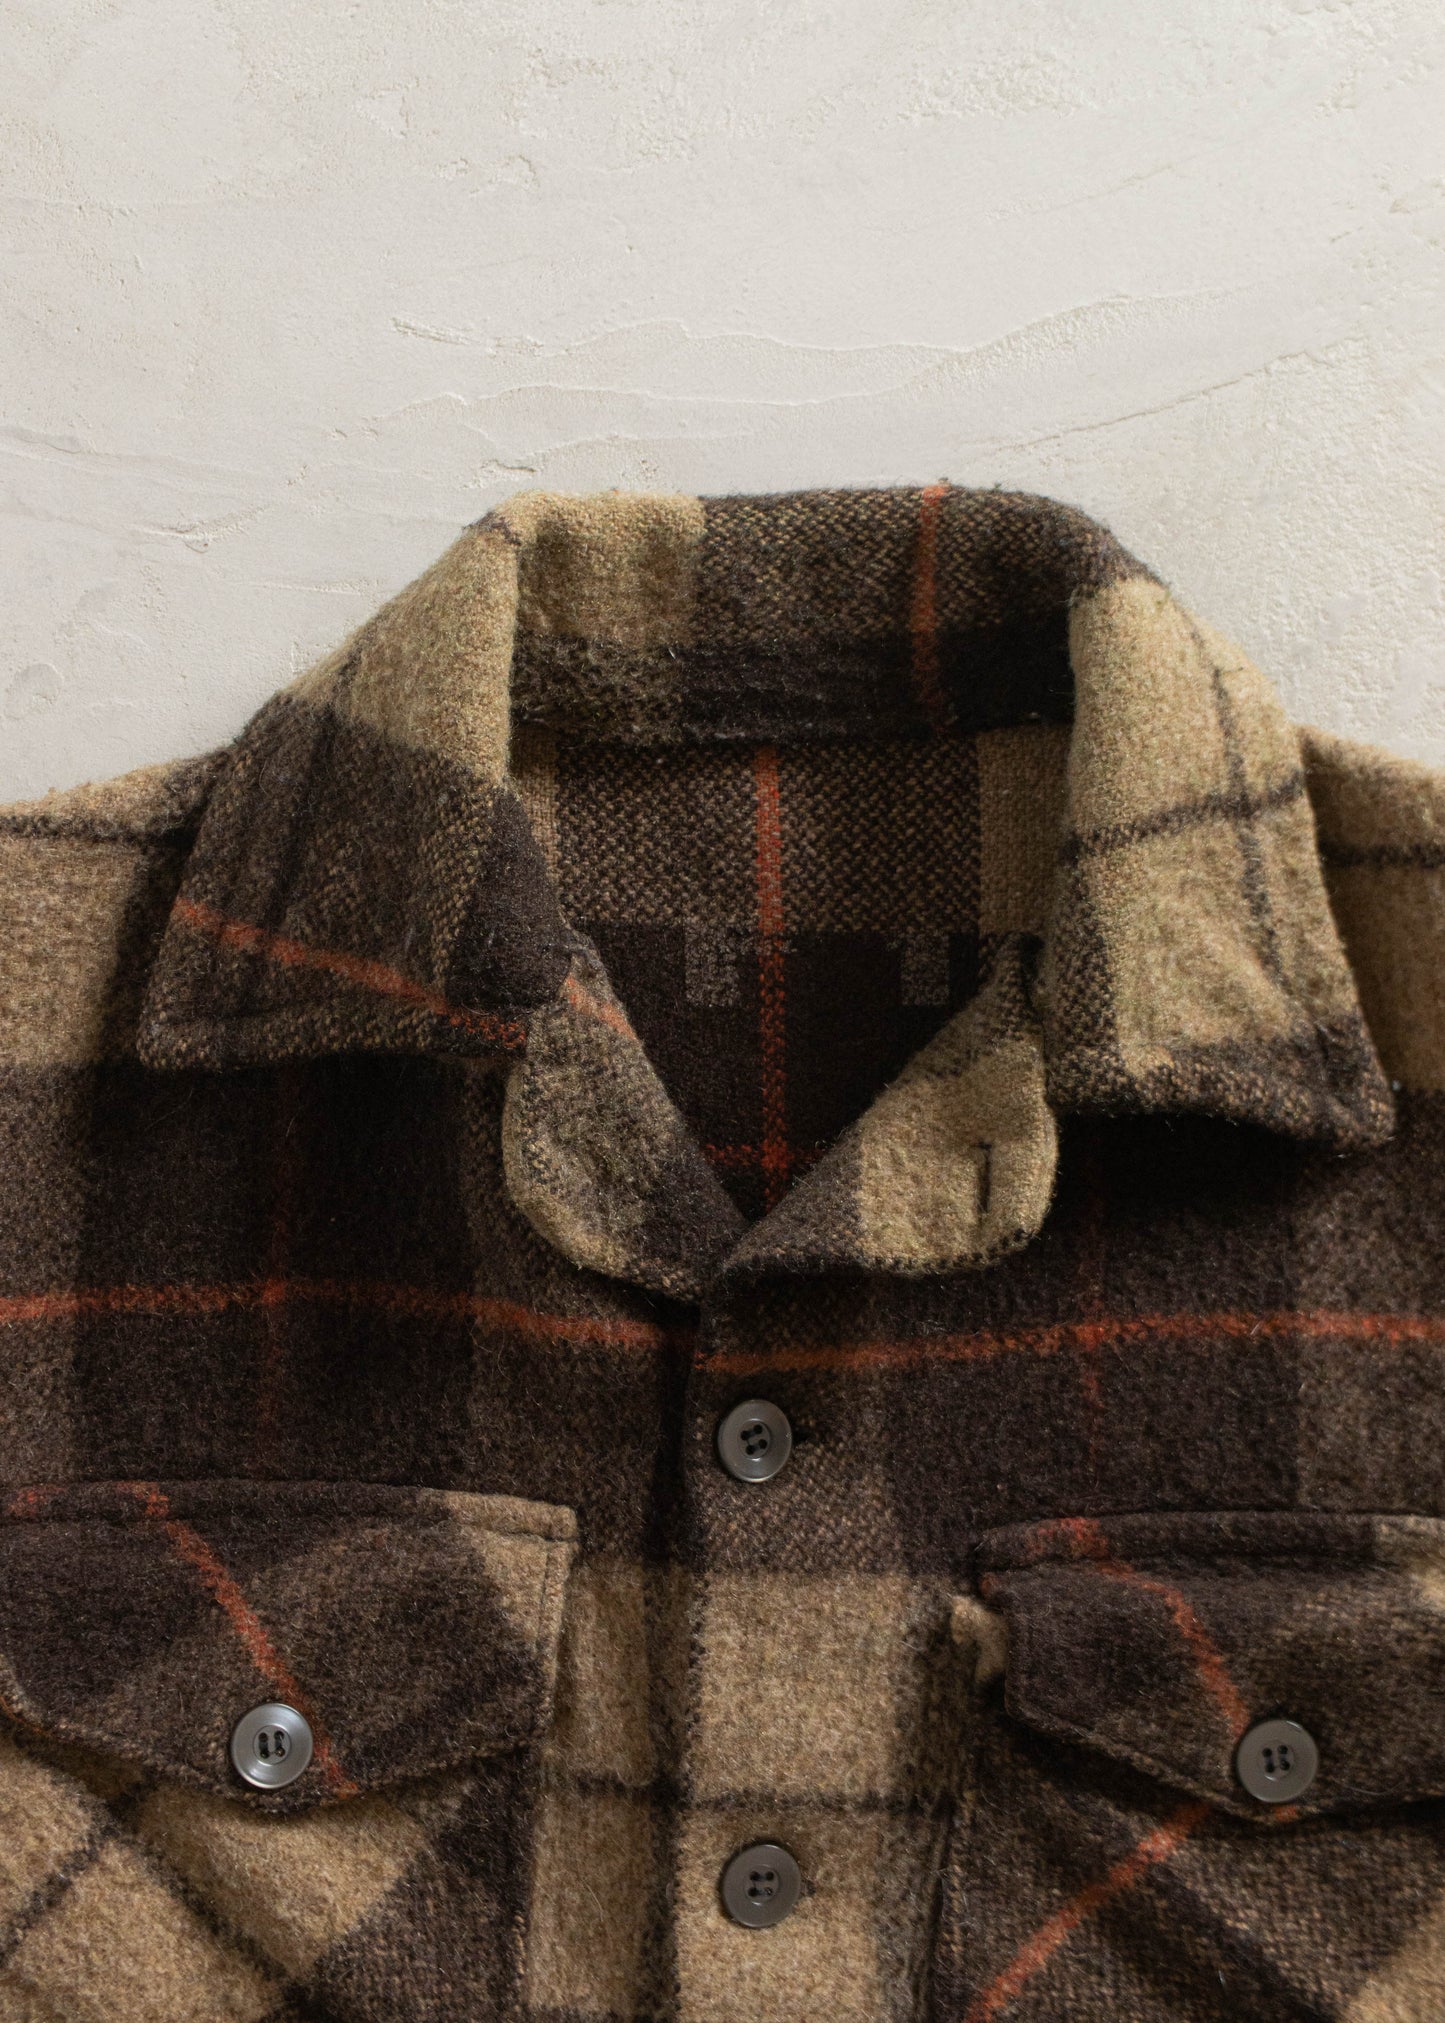 1970s Wool Flannel Button Up Shirt Size M/L